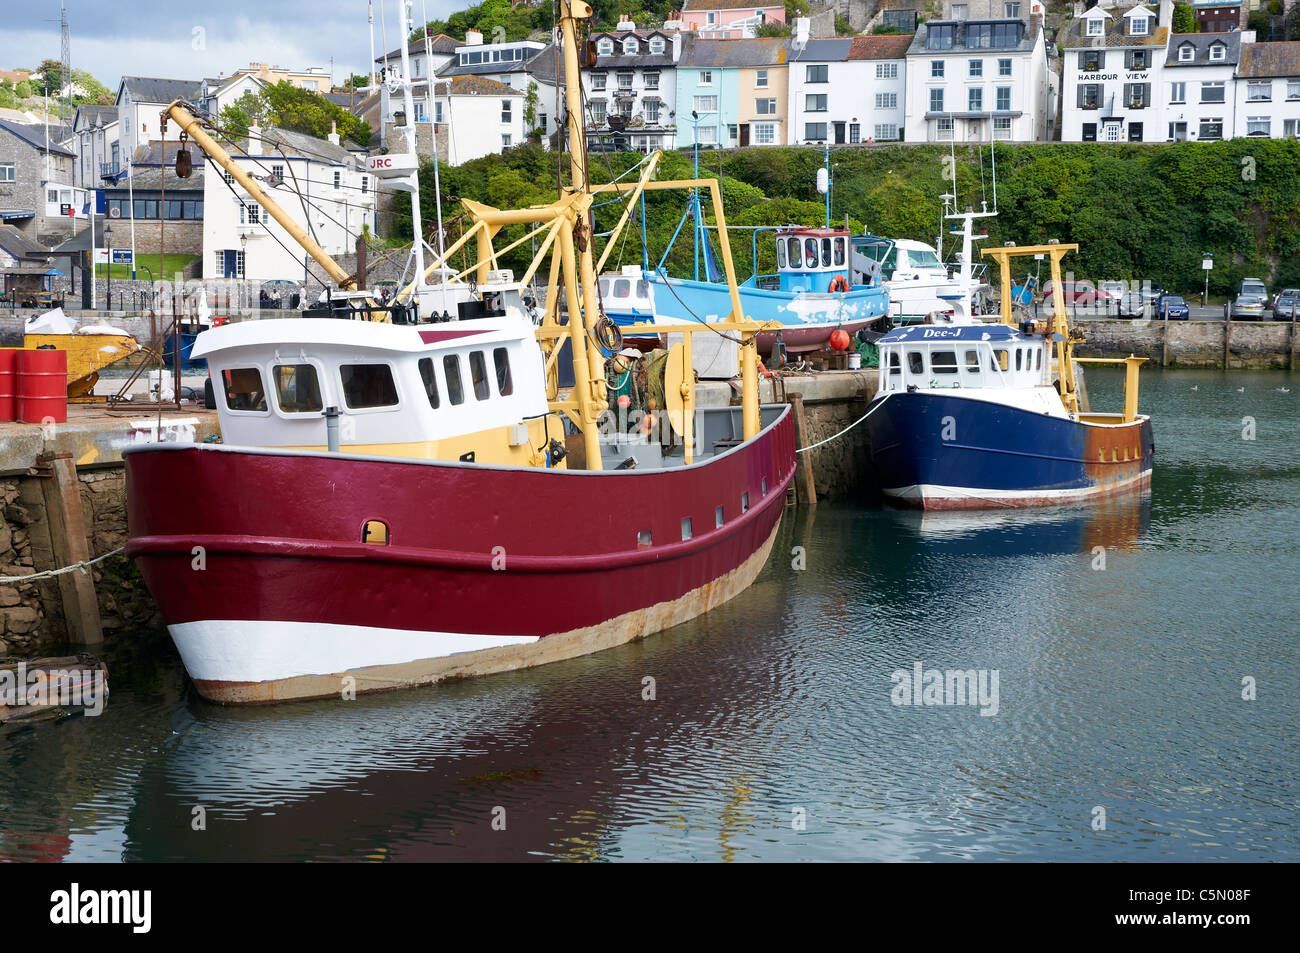 Fishing boats in the harbour at Brixham, Devon, England Stock Photo